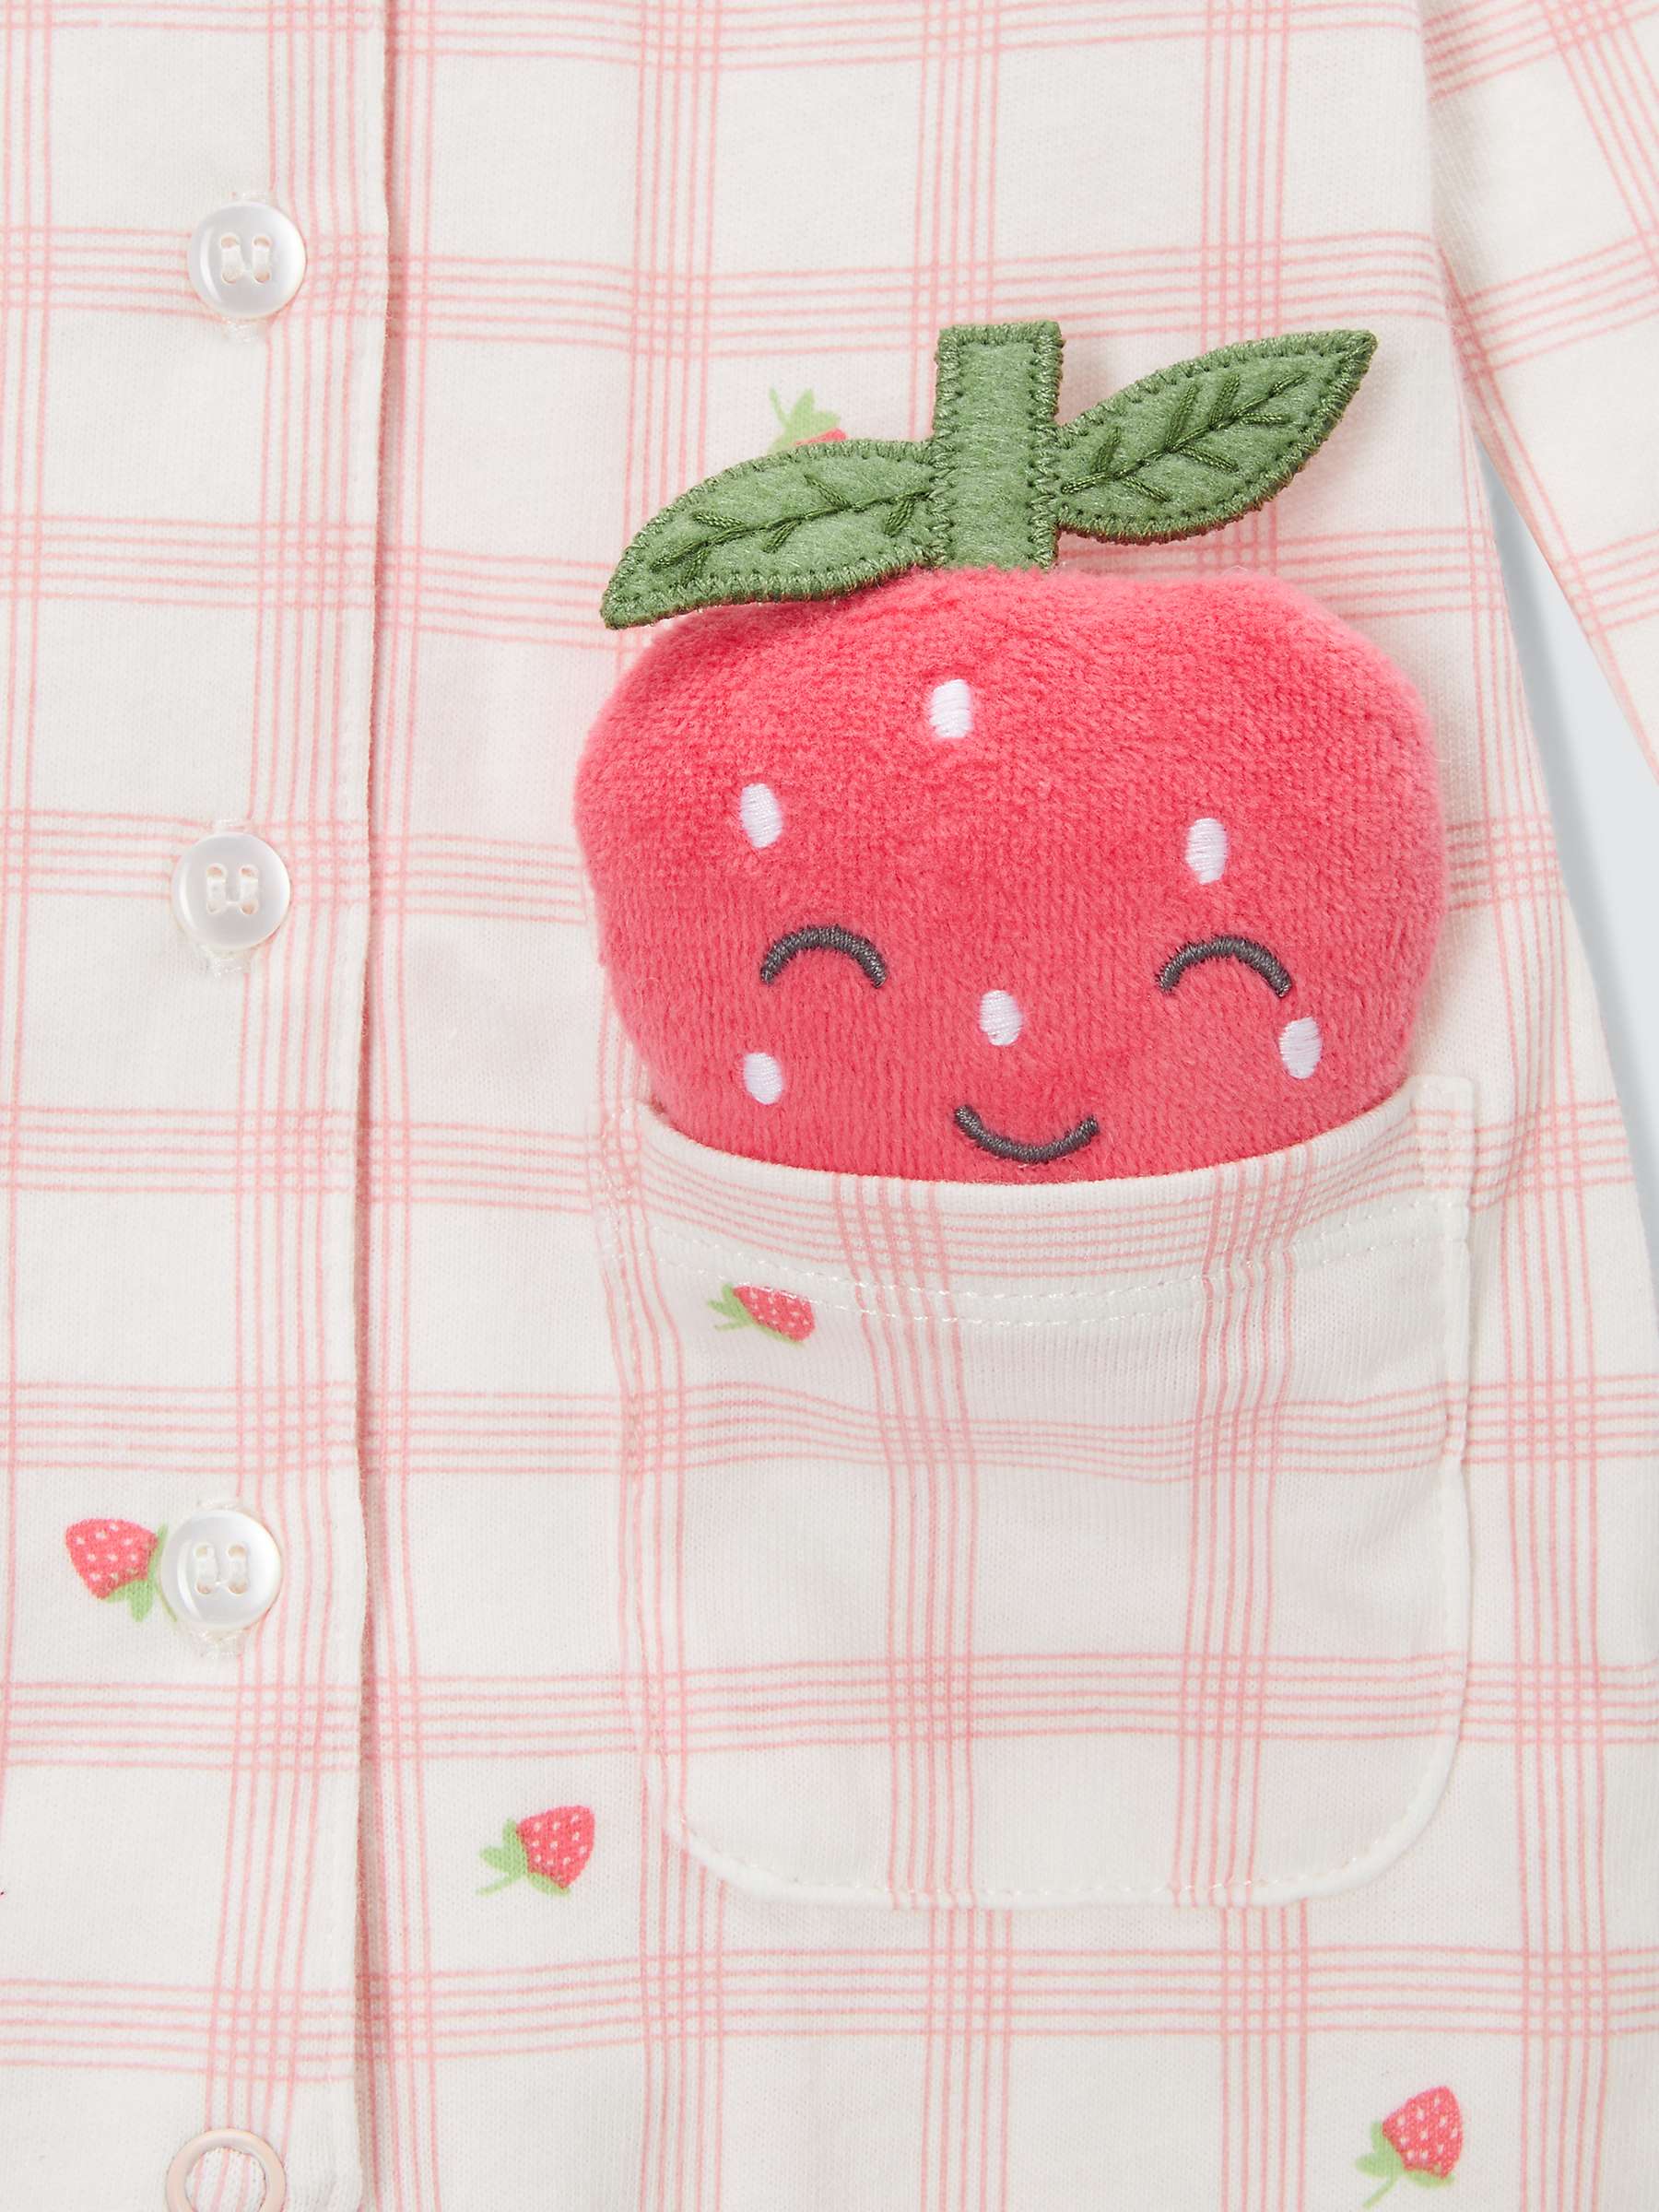 Buy John Lewis Baby Strawberry Gingham Pyjamas with Strawberry Toy, Pink Online at johnlewis.com